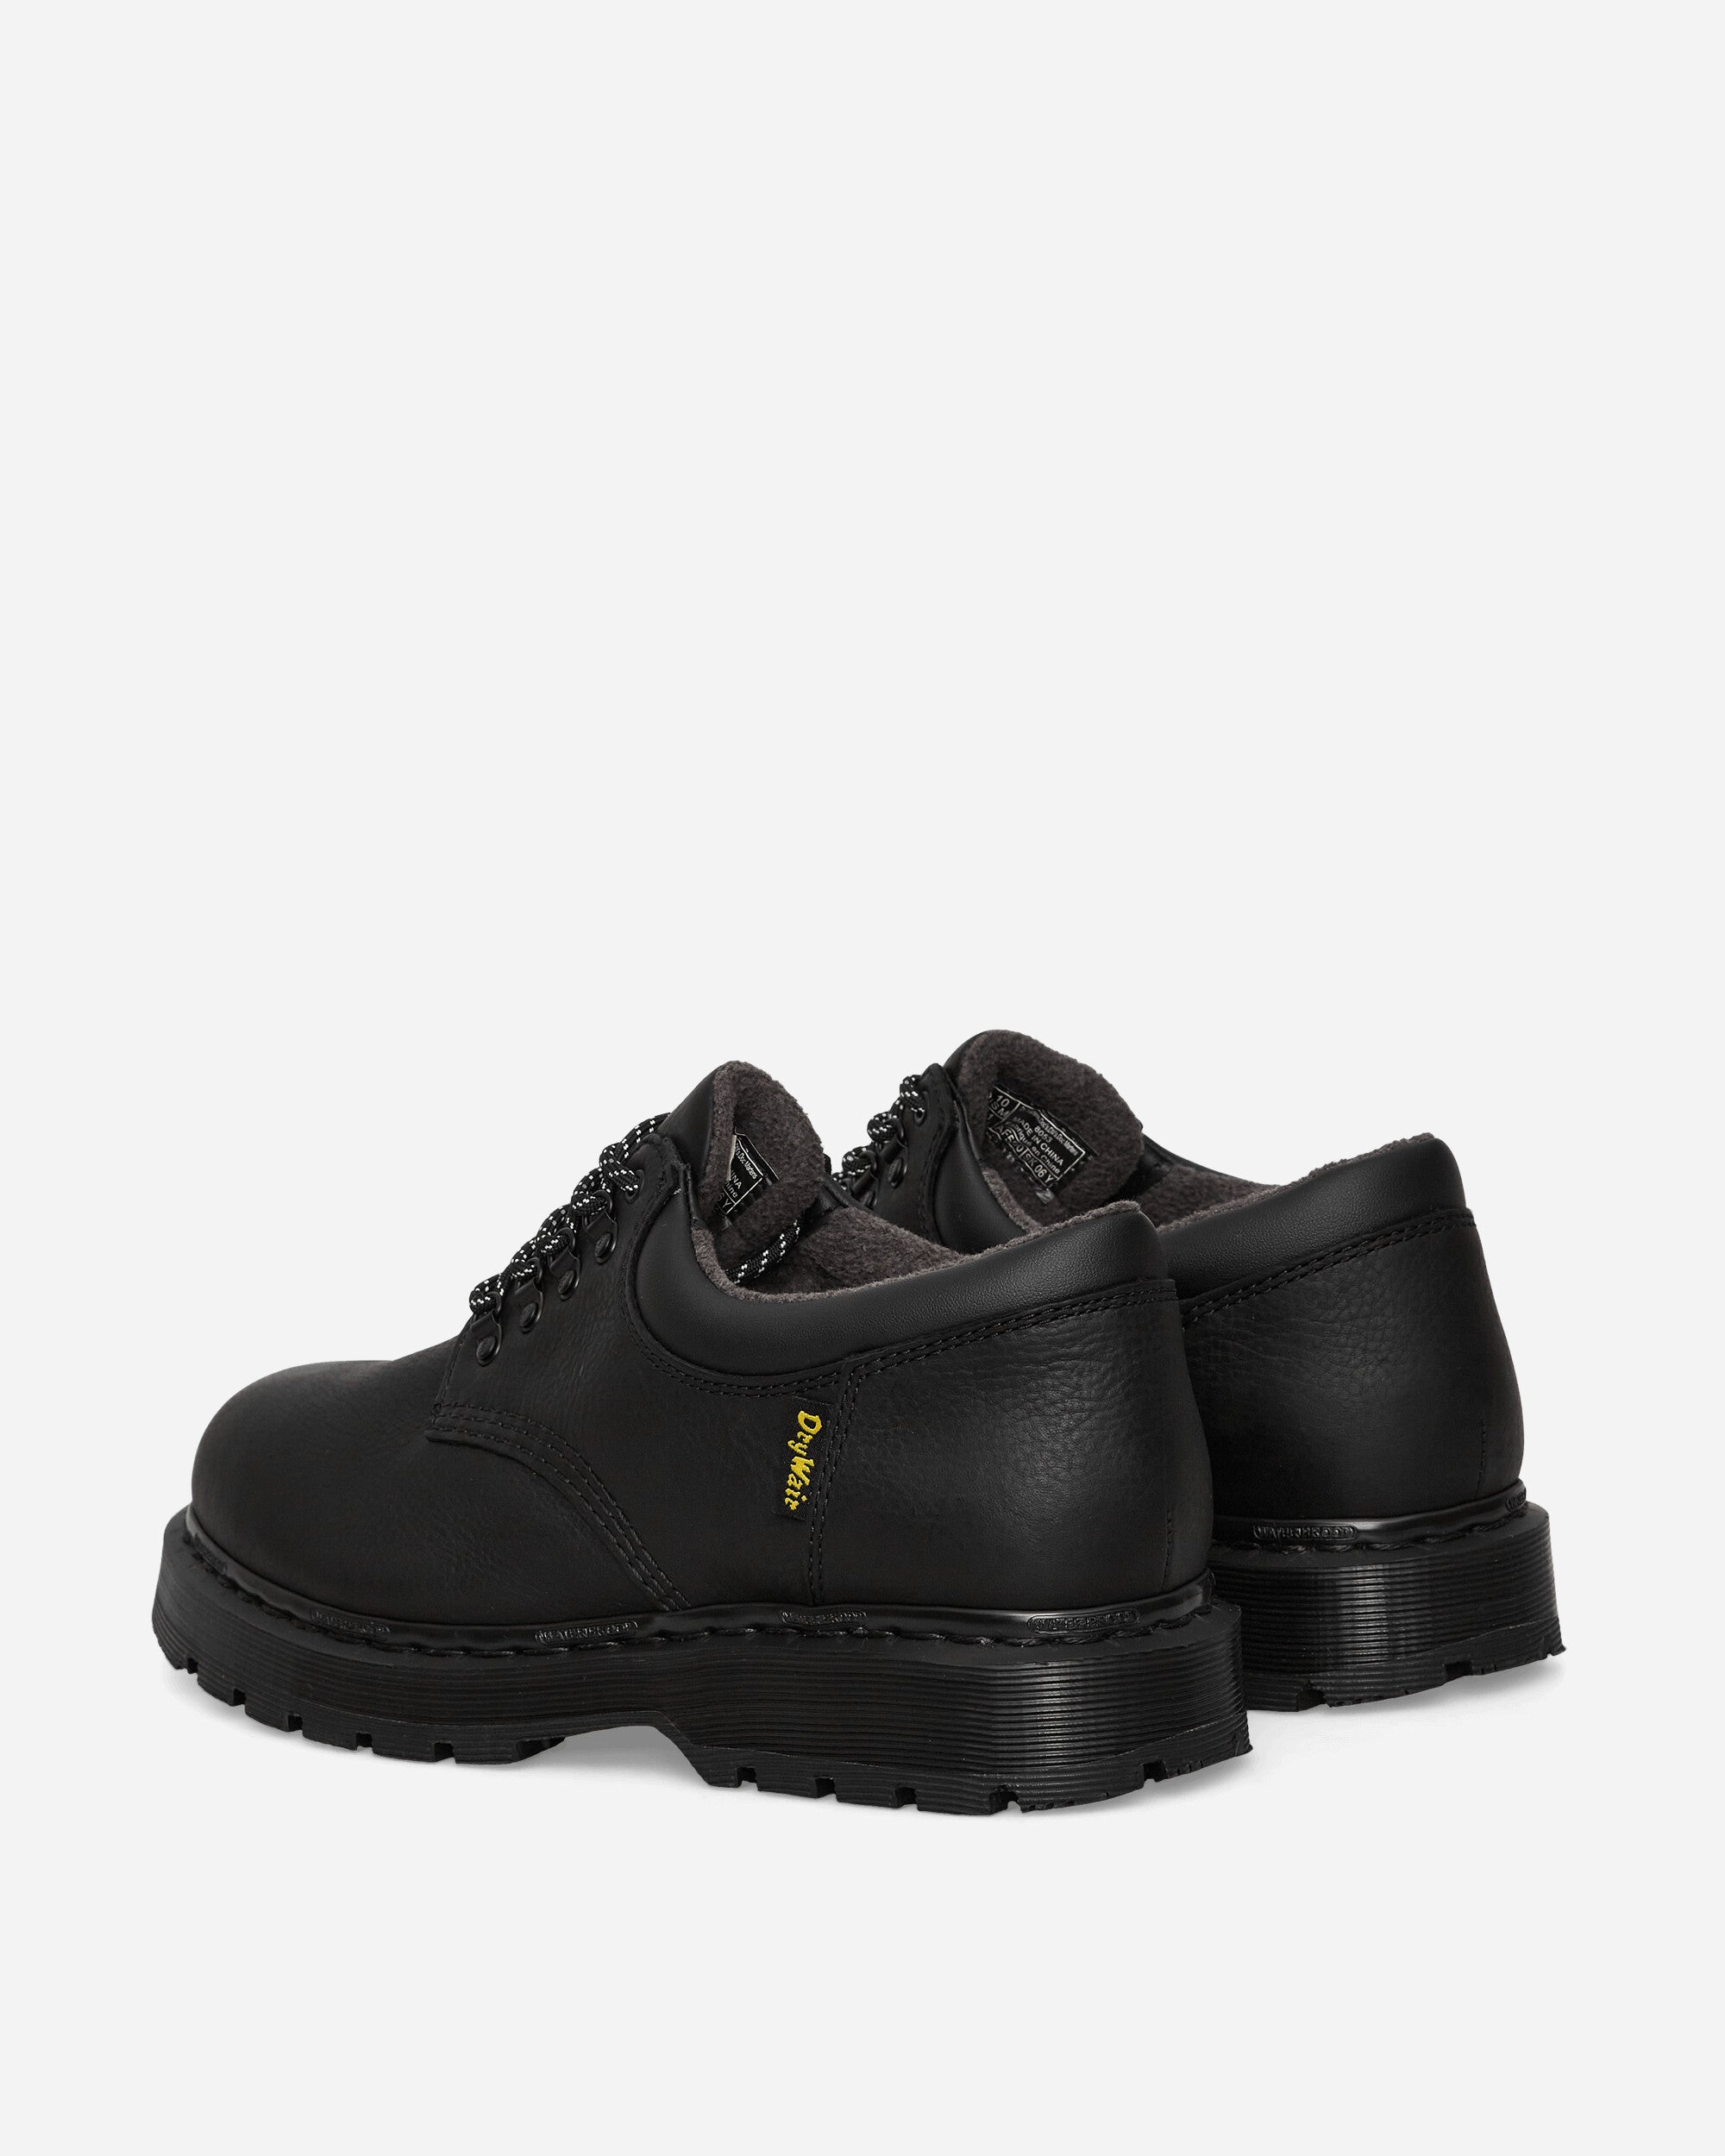 Dr. Martens 8053 Black Tailgate Wp Classic Shoes Laced Up 31195001 001